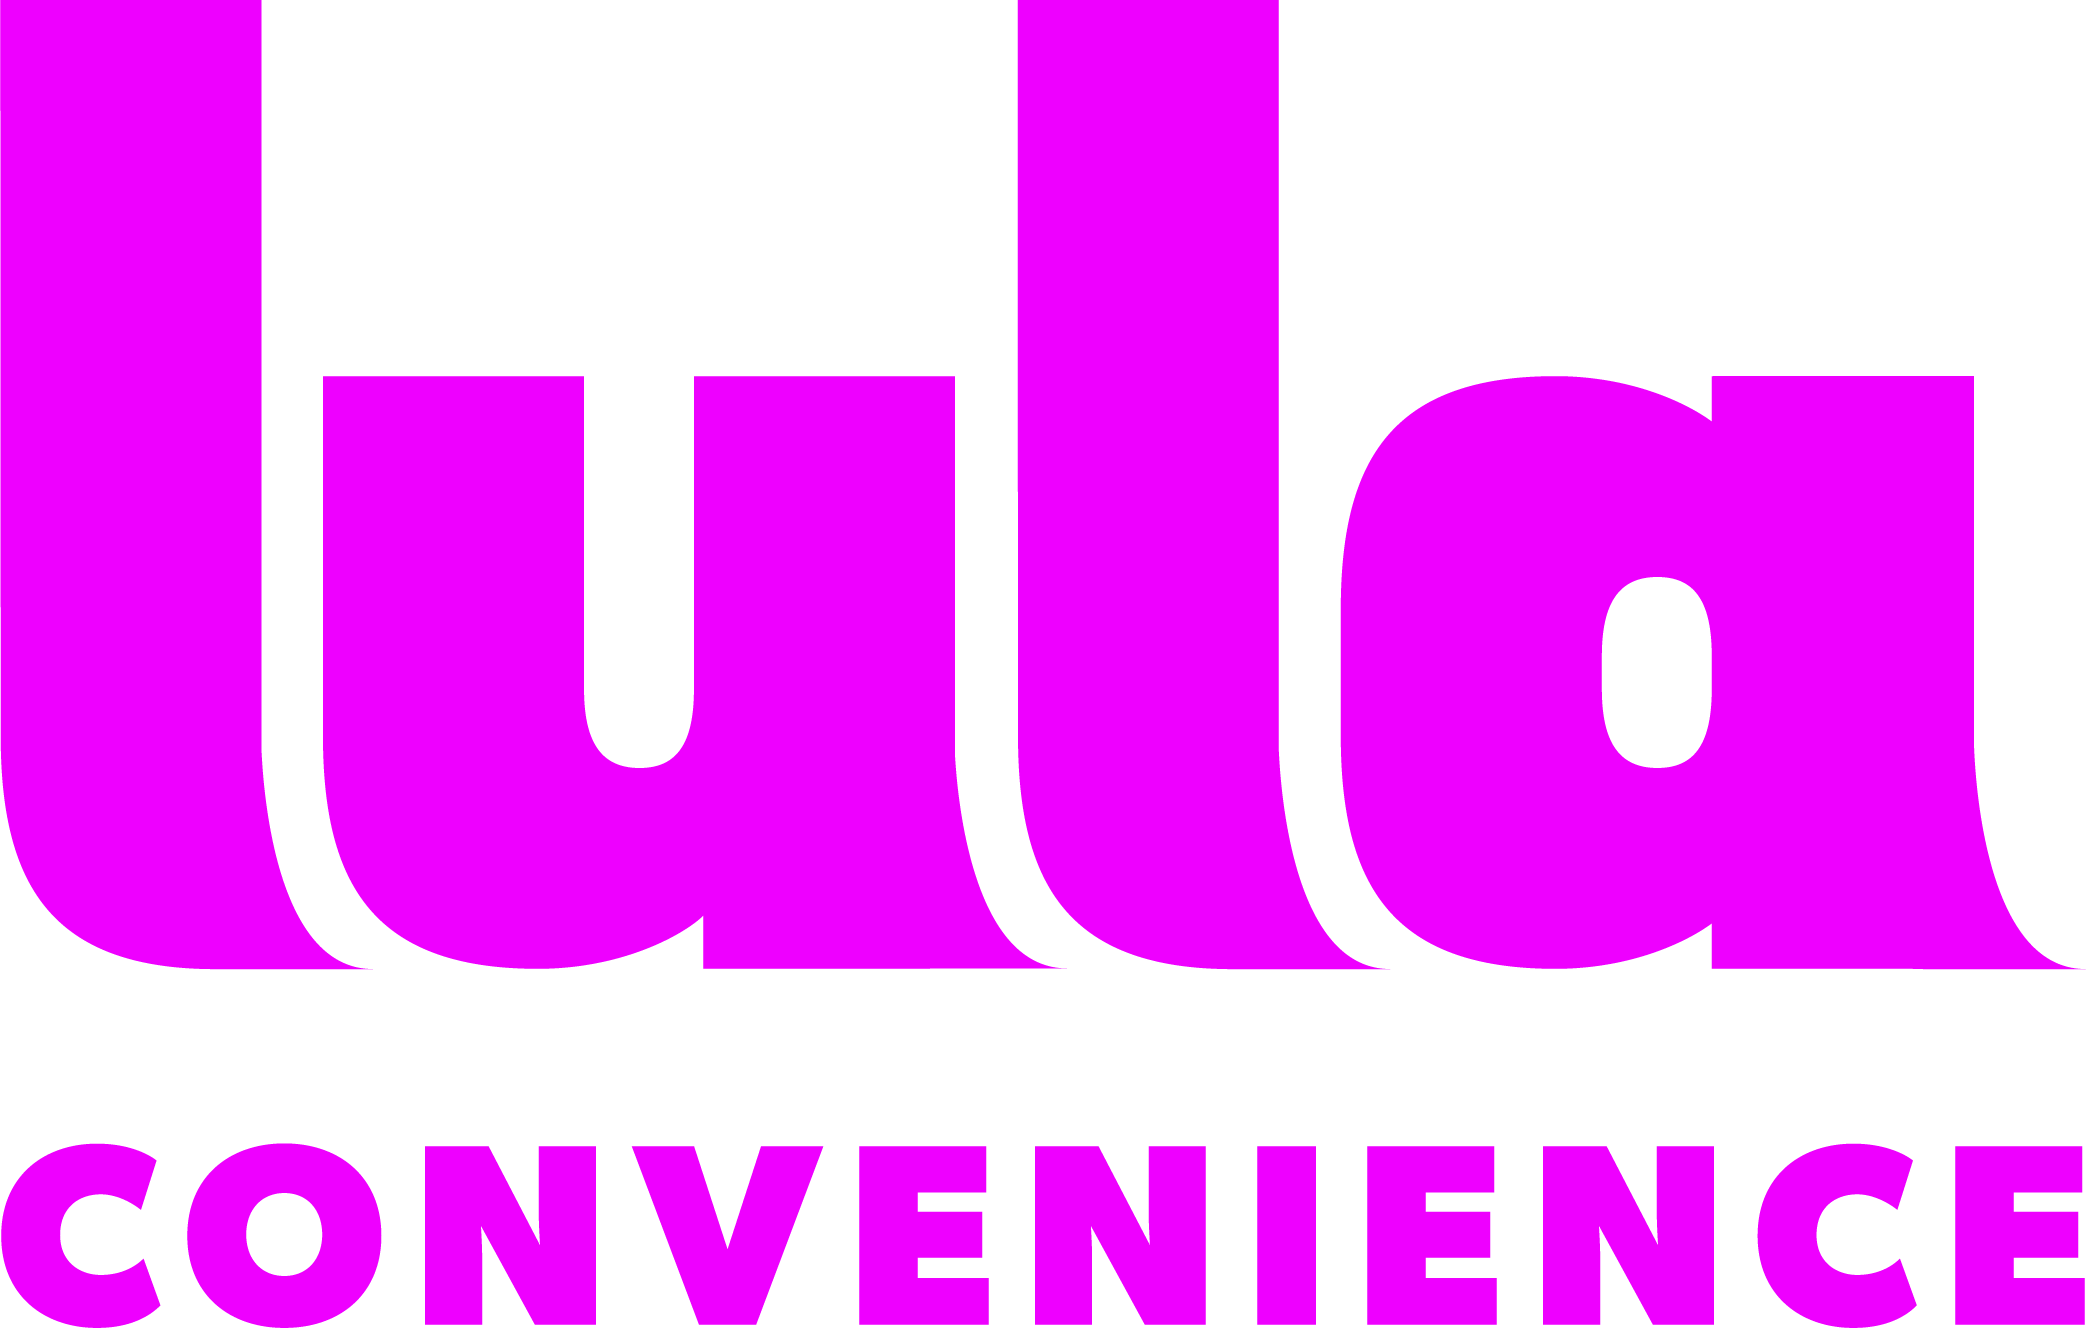 Lula Convenience Partners With Gilbarco Veeder-Root to Streamline Inventory  Management and Delivery Fulfillment for Convenience Stores | PressRelease. com